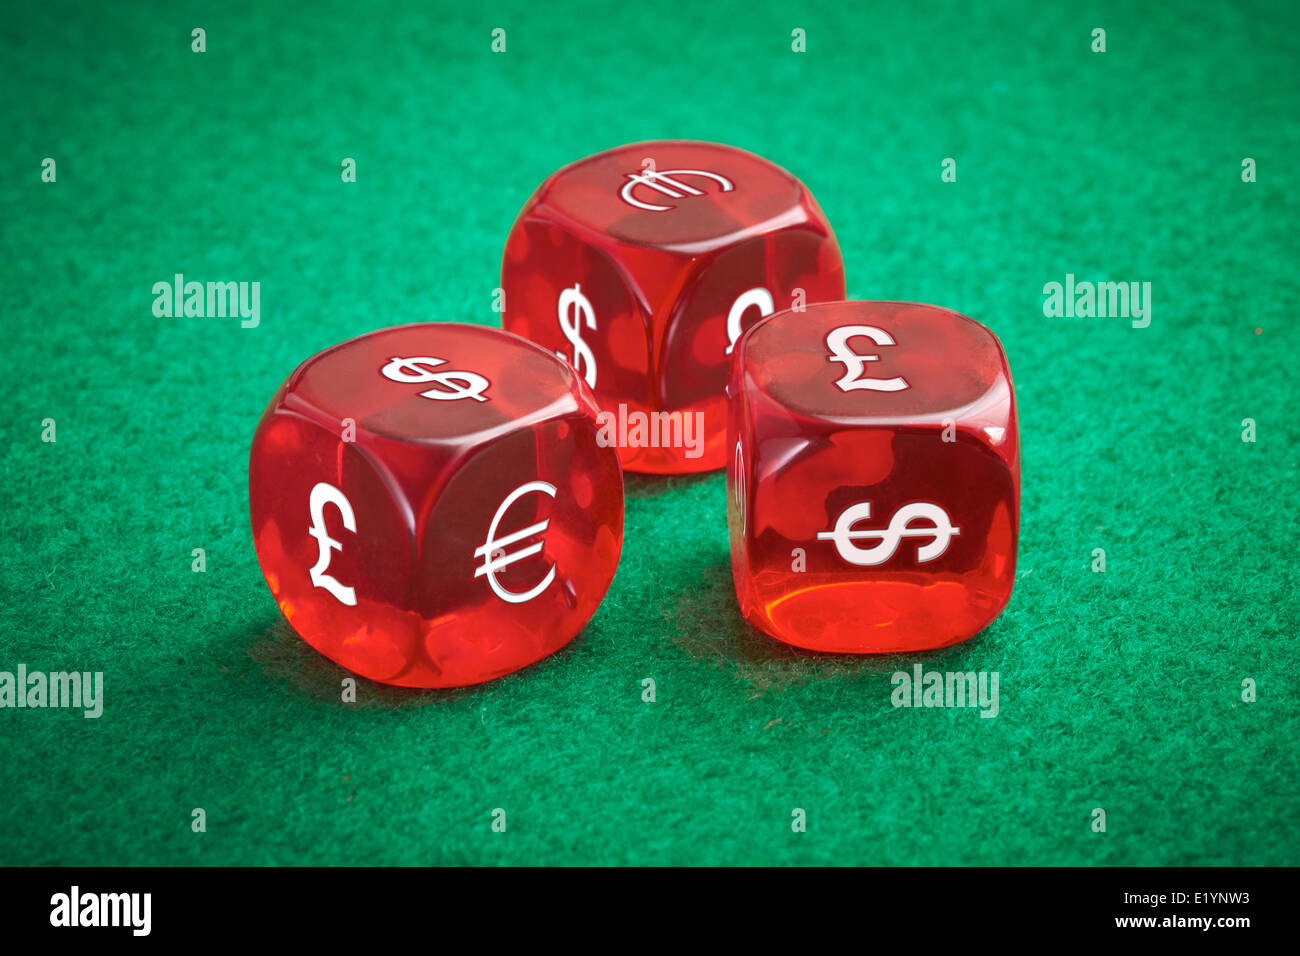 Currency exchange rate concept, three red dice on a green felt background. Stock Photo